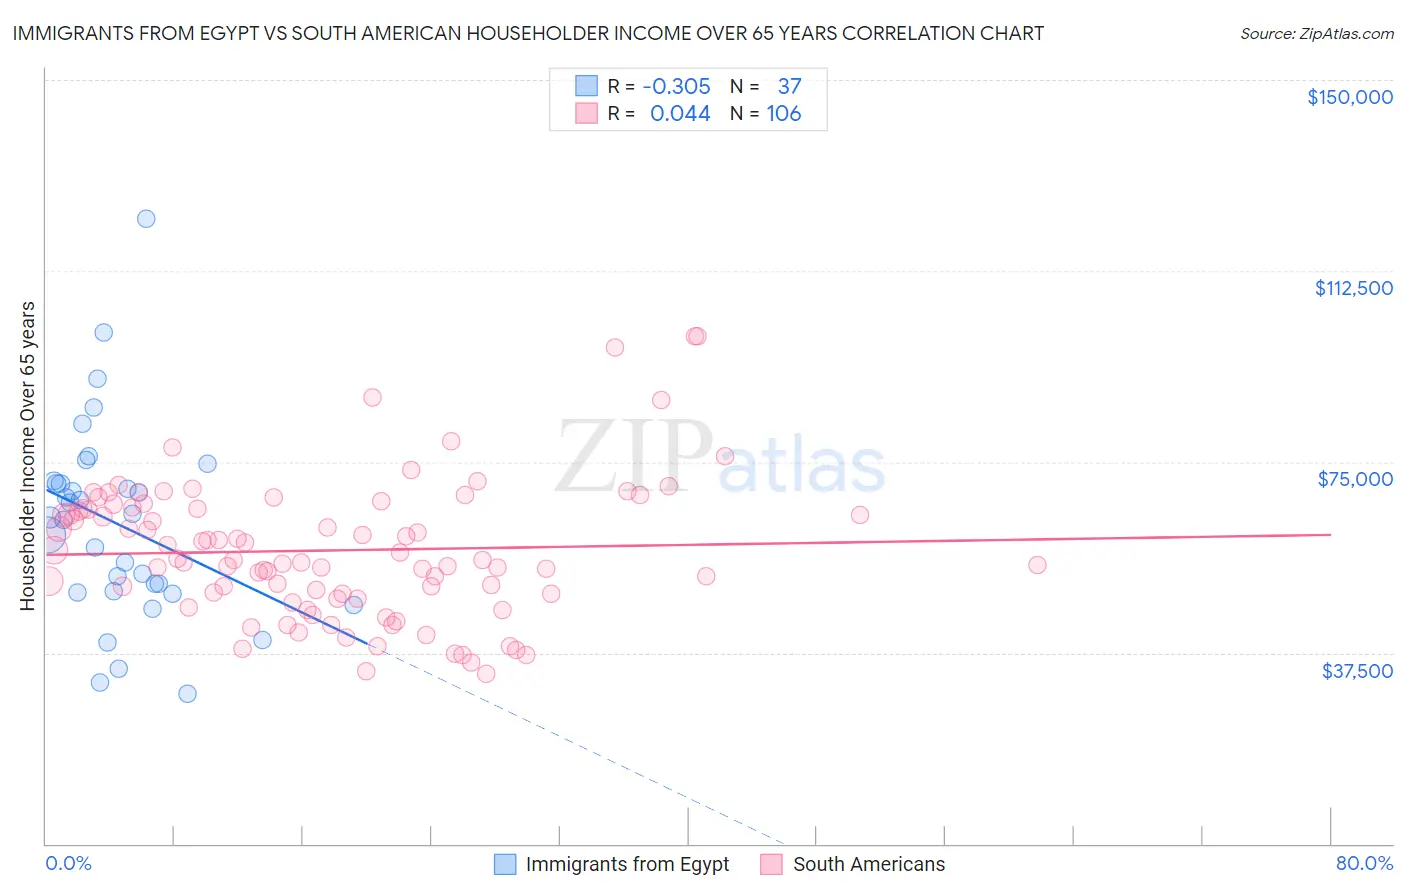 Immigrants from Egypt vs South American Householder Income Over 65 years